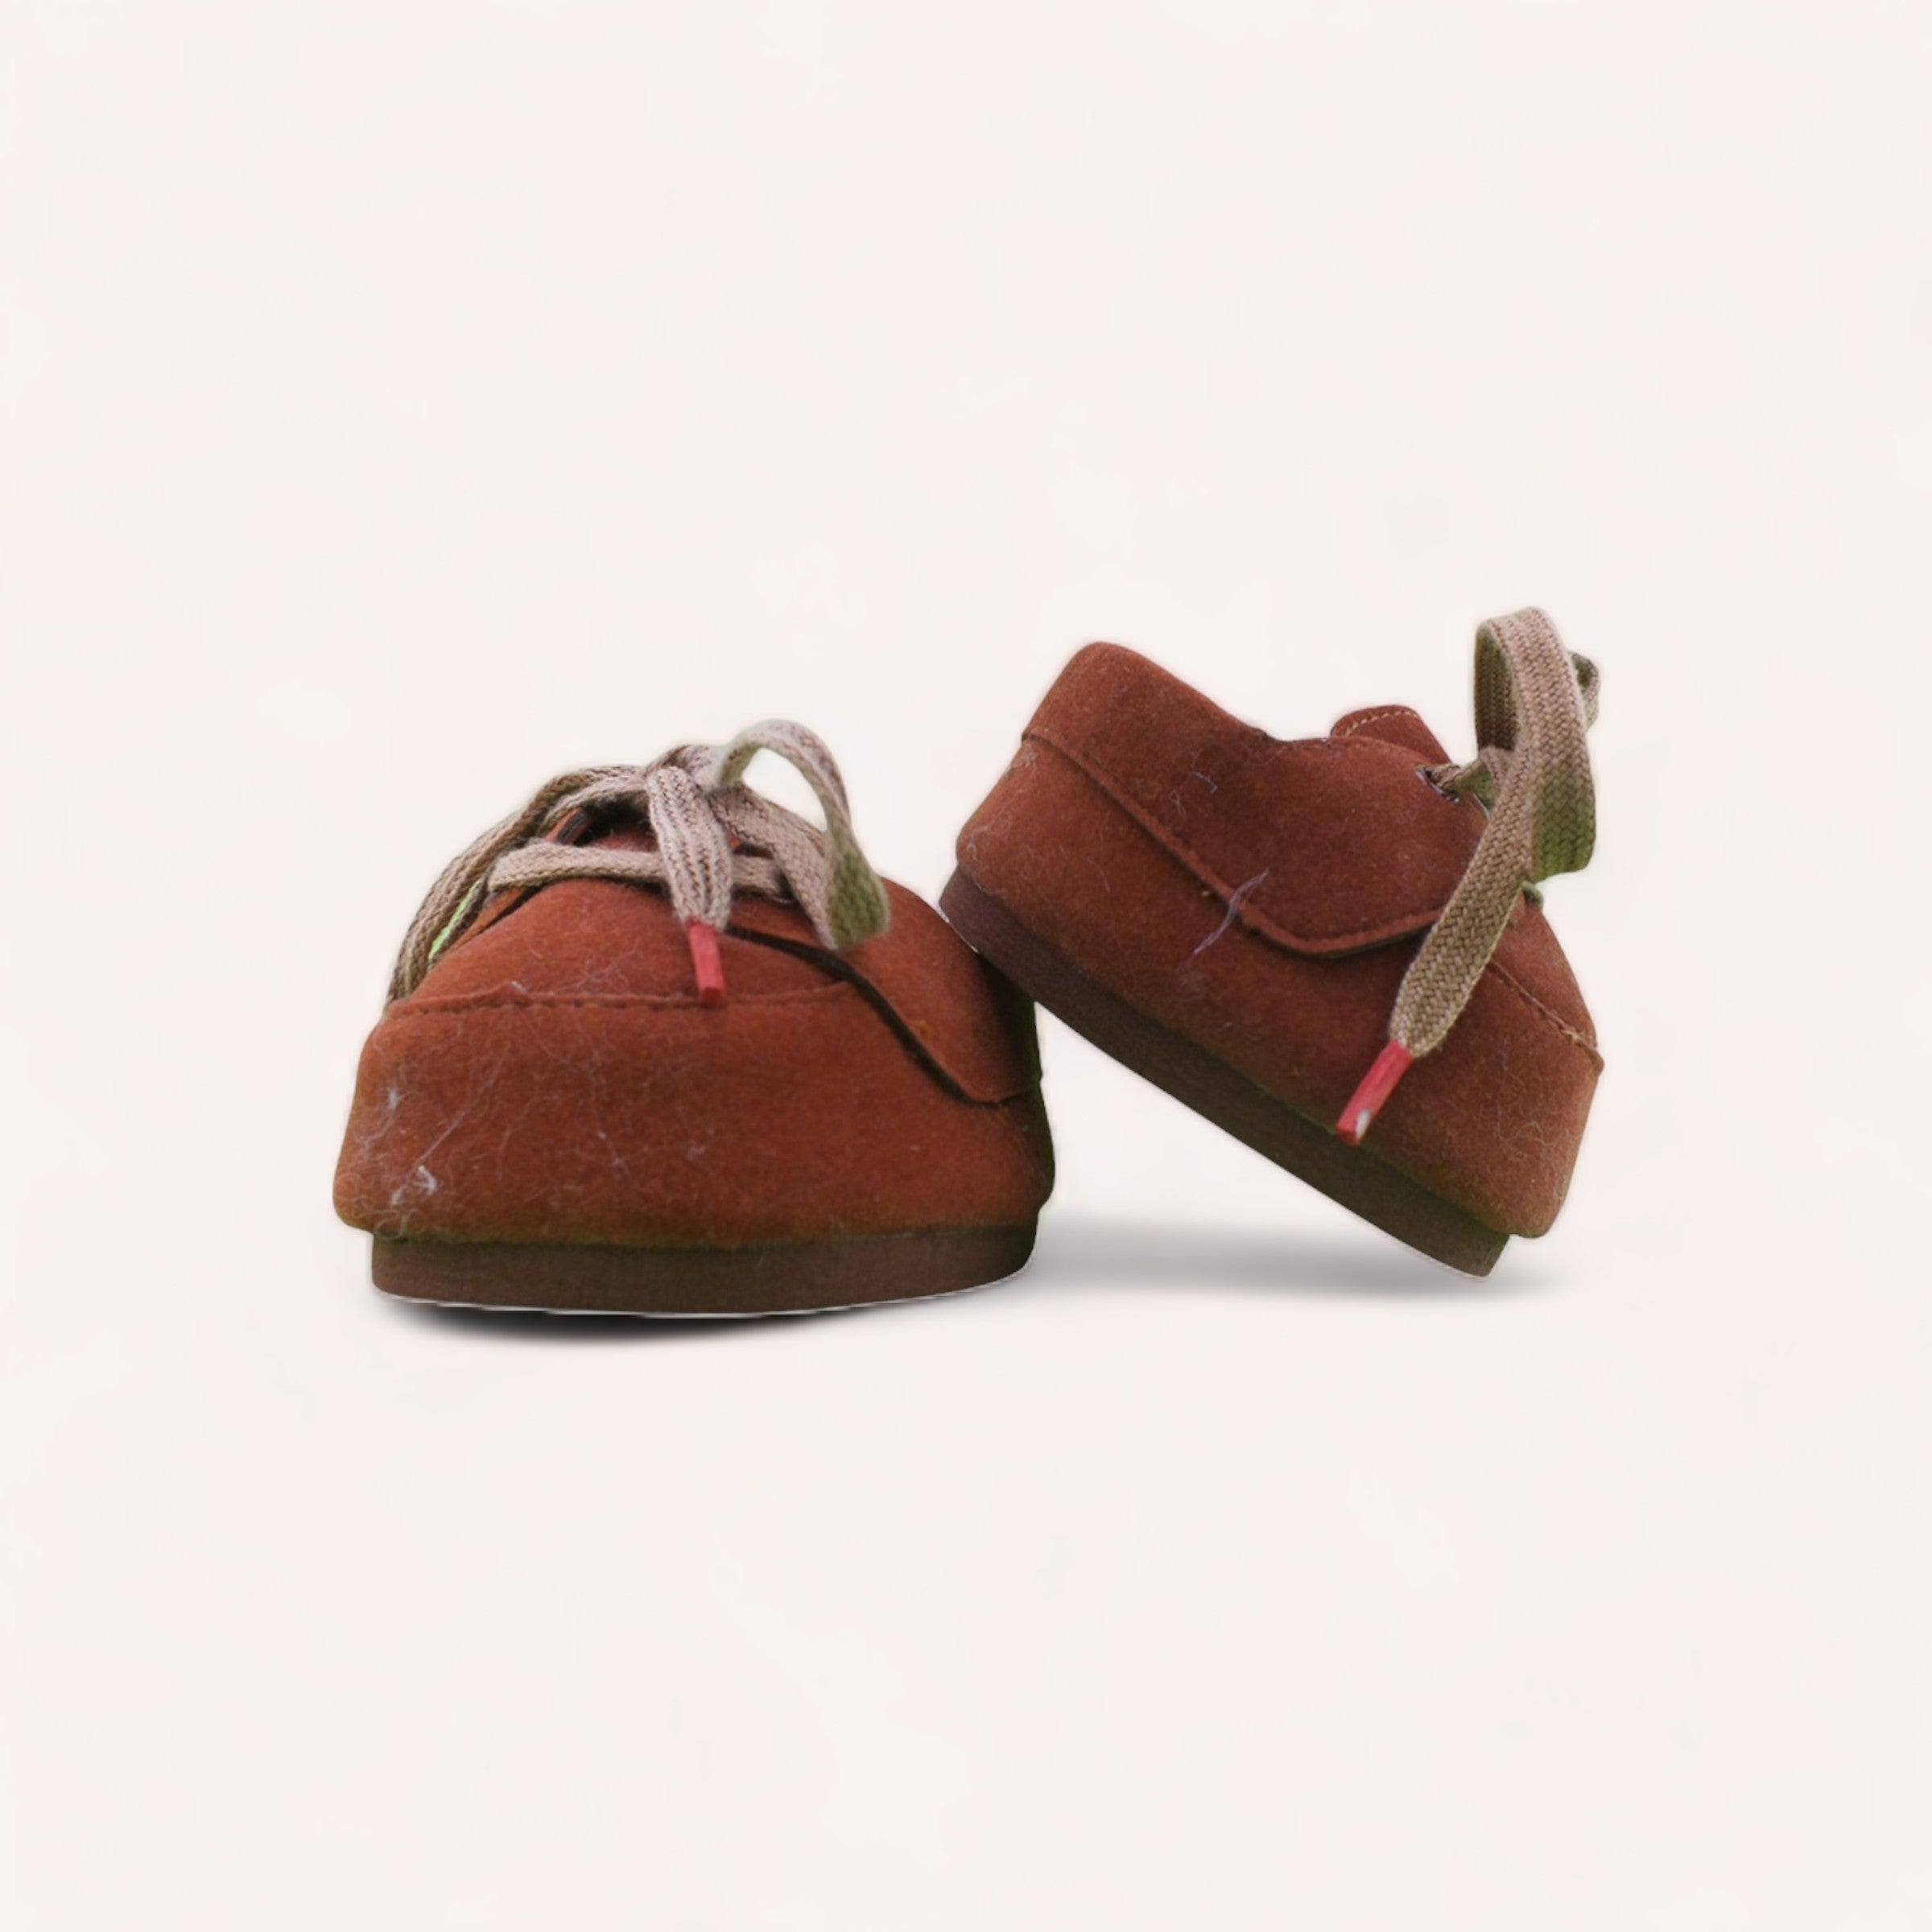 A pair of well-worn, tiny toddler Bear Brown Lace Up Boots from The Teddy Factory, with laces, standing on a white background, evoking a sense of nostalgia and the rapid pace of childhood growth.